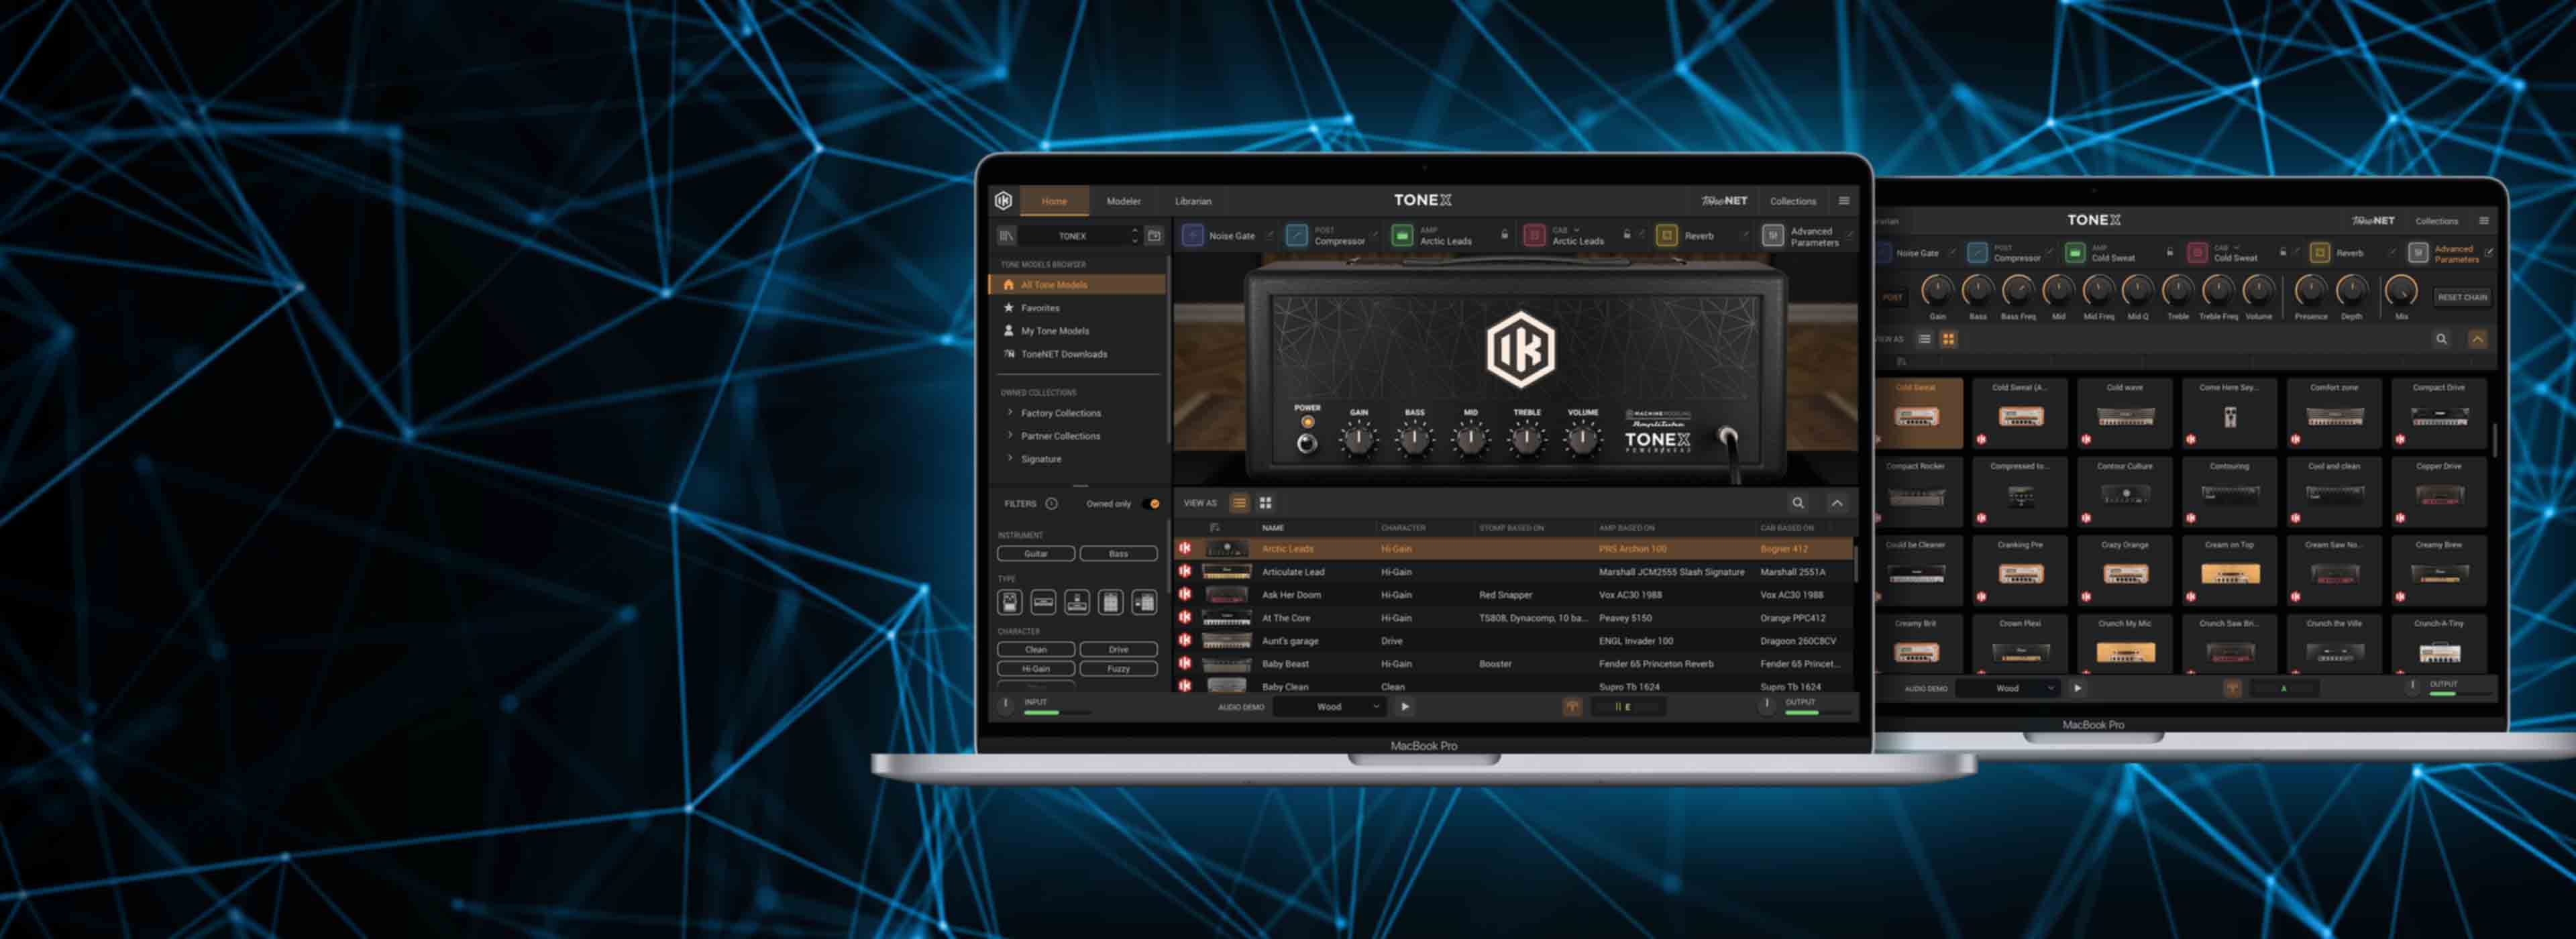 A FREE update featuring a new interface, expanded tools and more Premium Tone Models